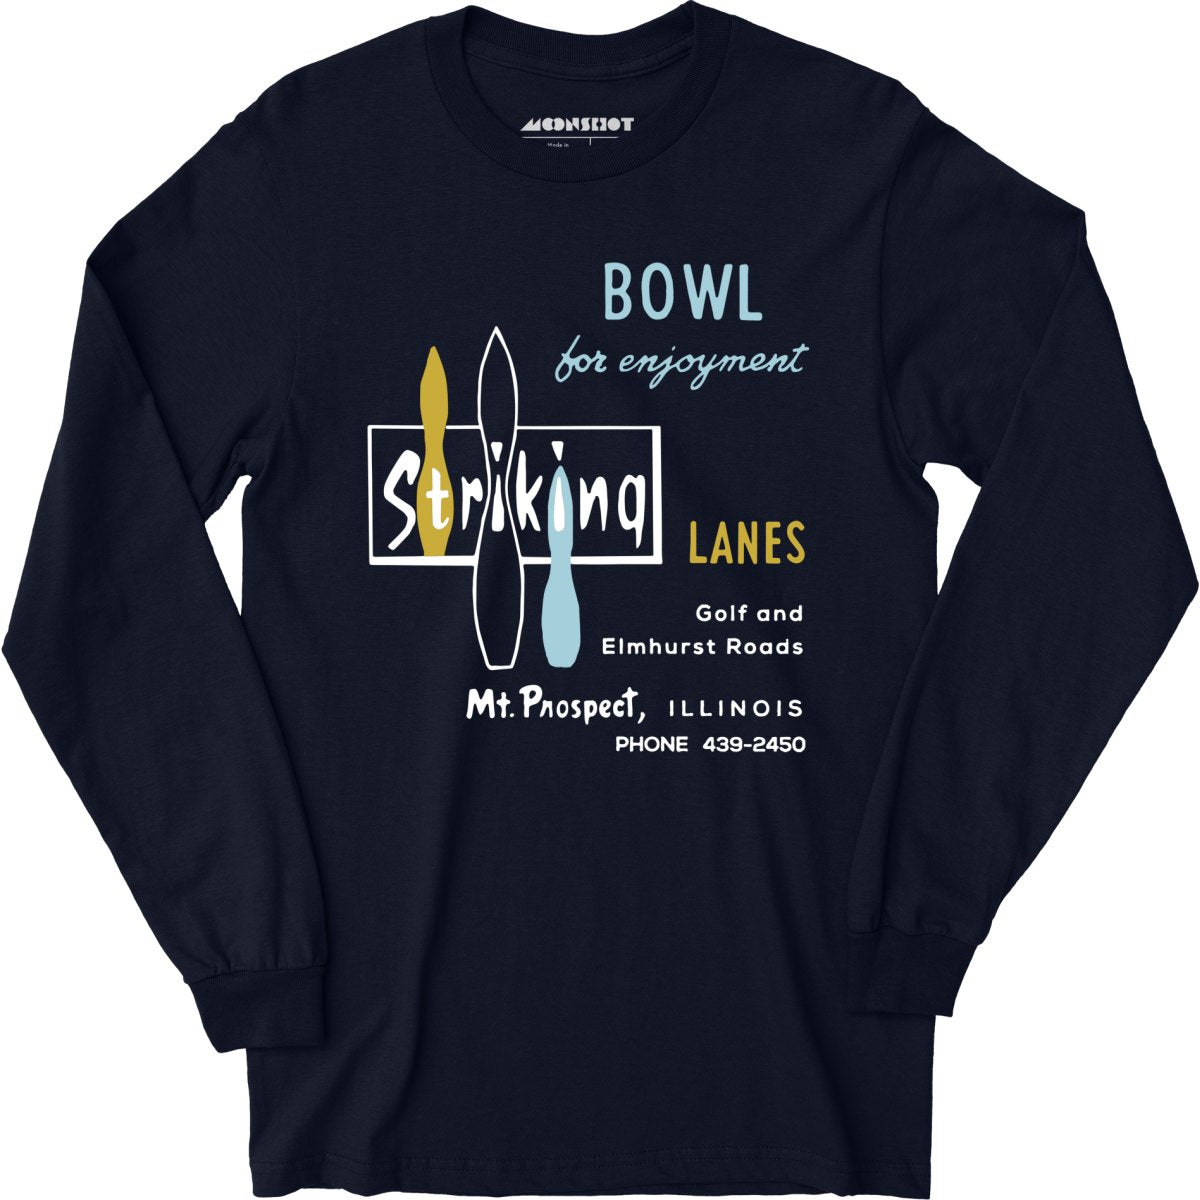 Striking Lanes - Mt. Prospect, IL - Vintage Bowling Alley - Long Sleeve T-Shirt